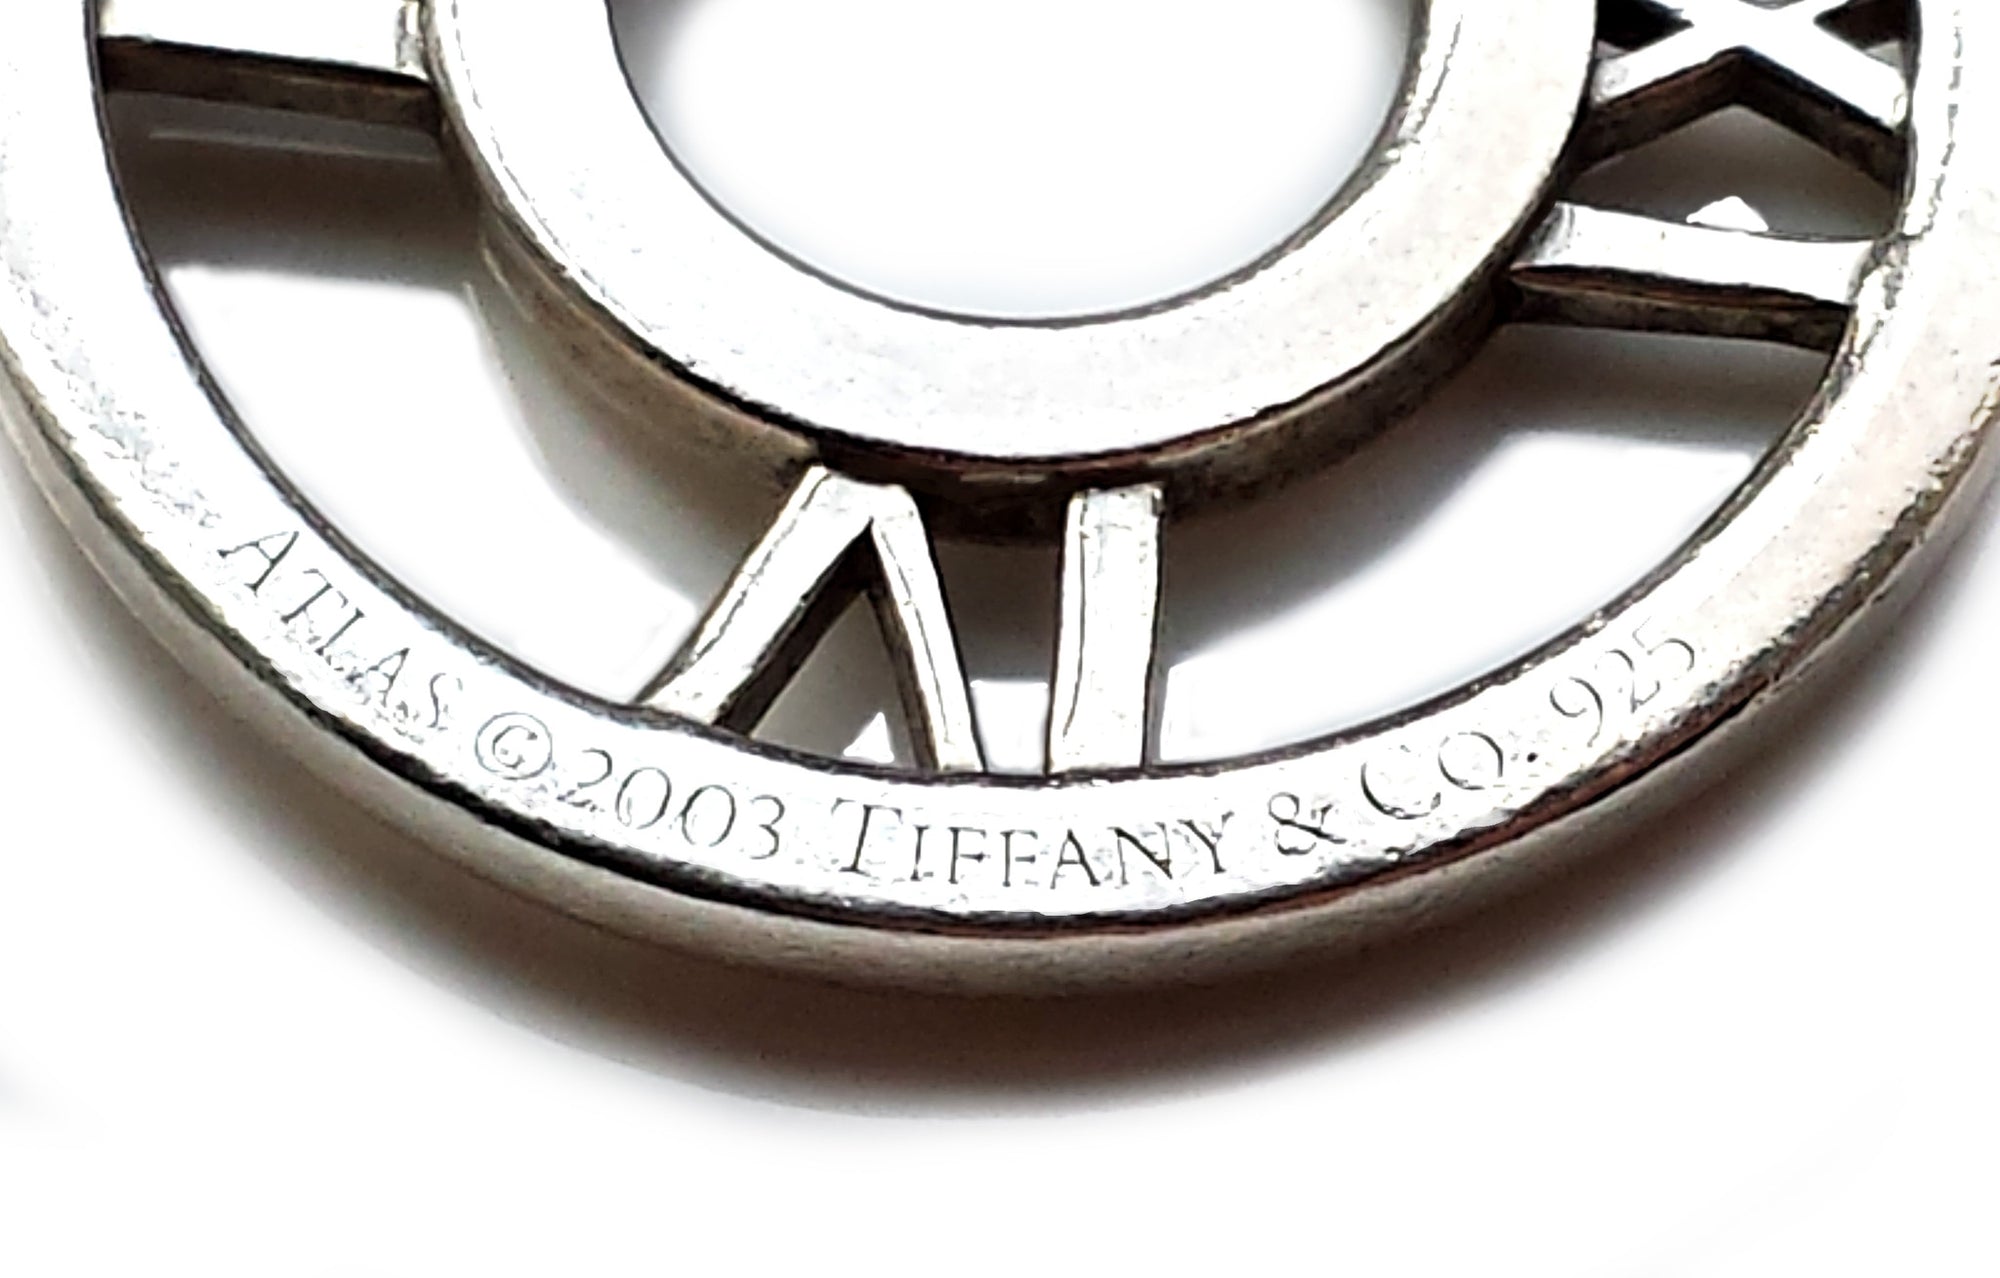 Tiffany & Co. 7½ inch Sterling Silver Atlas Toggle Bracelet with Pouch